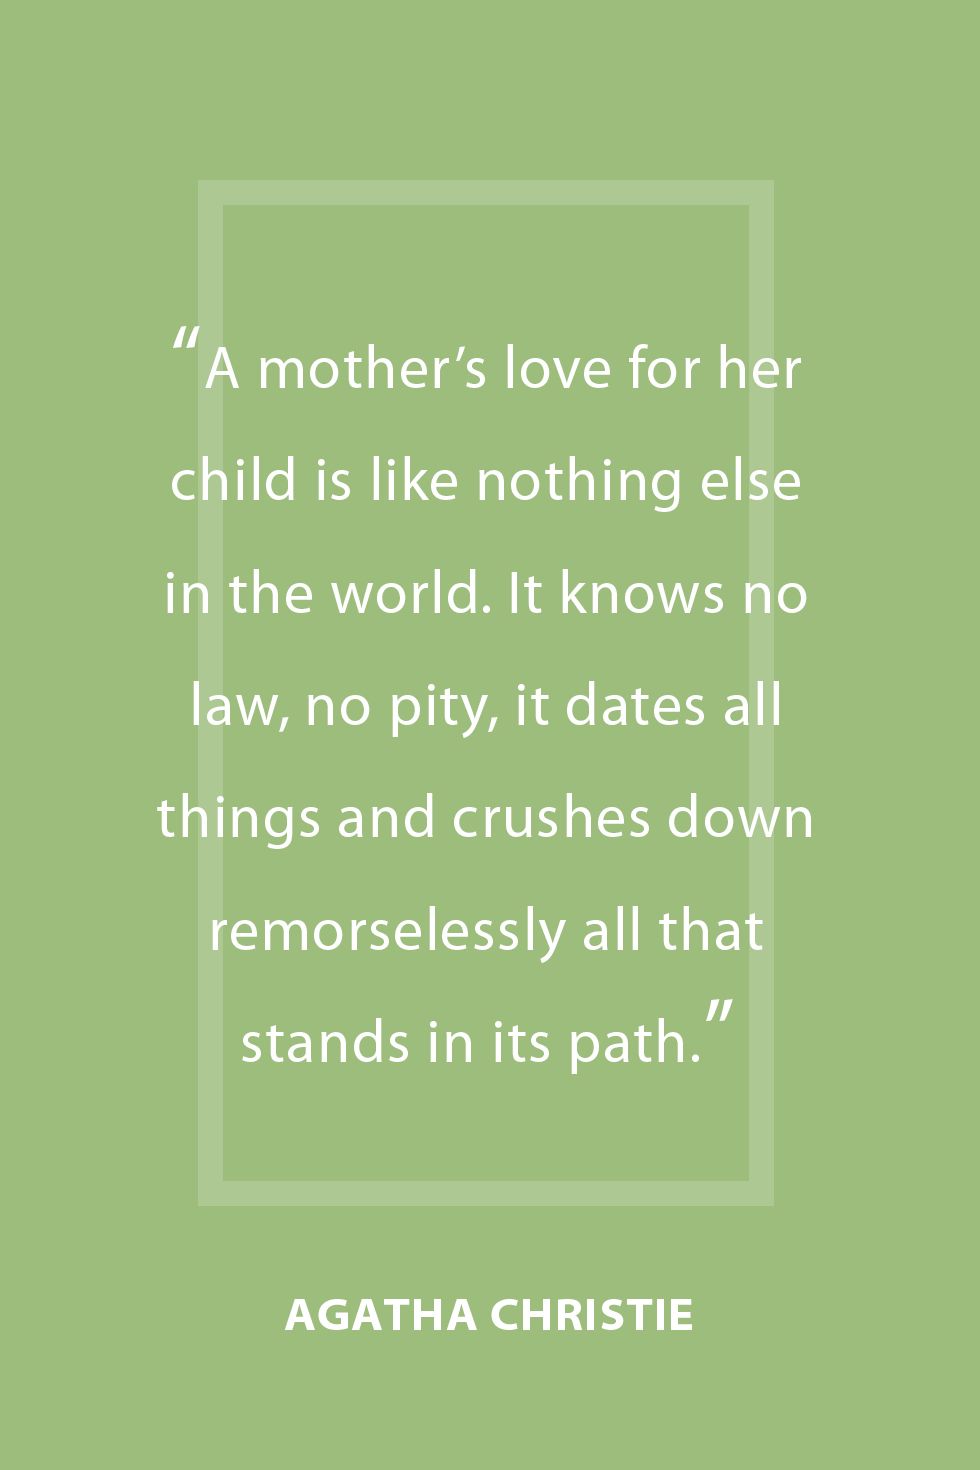 mothers day quotes agatha christie